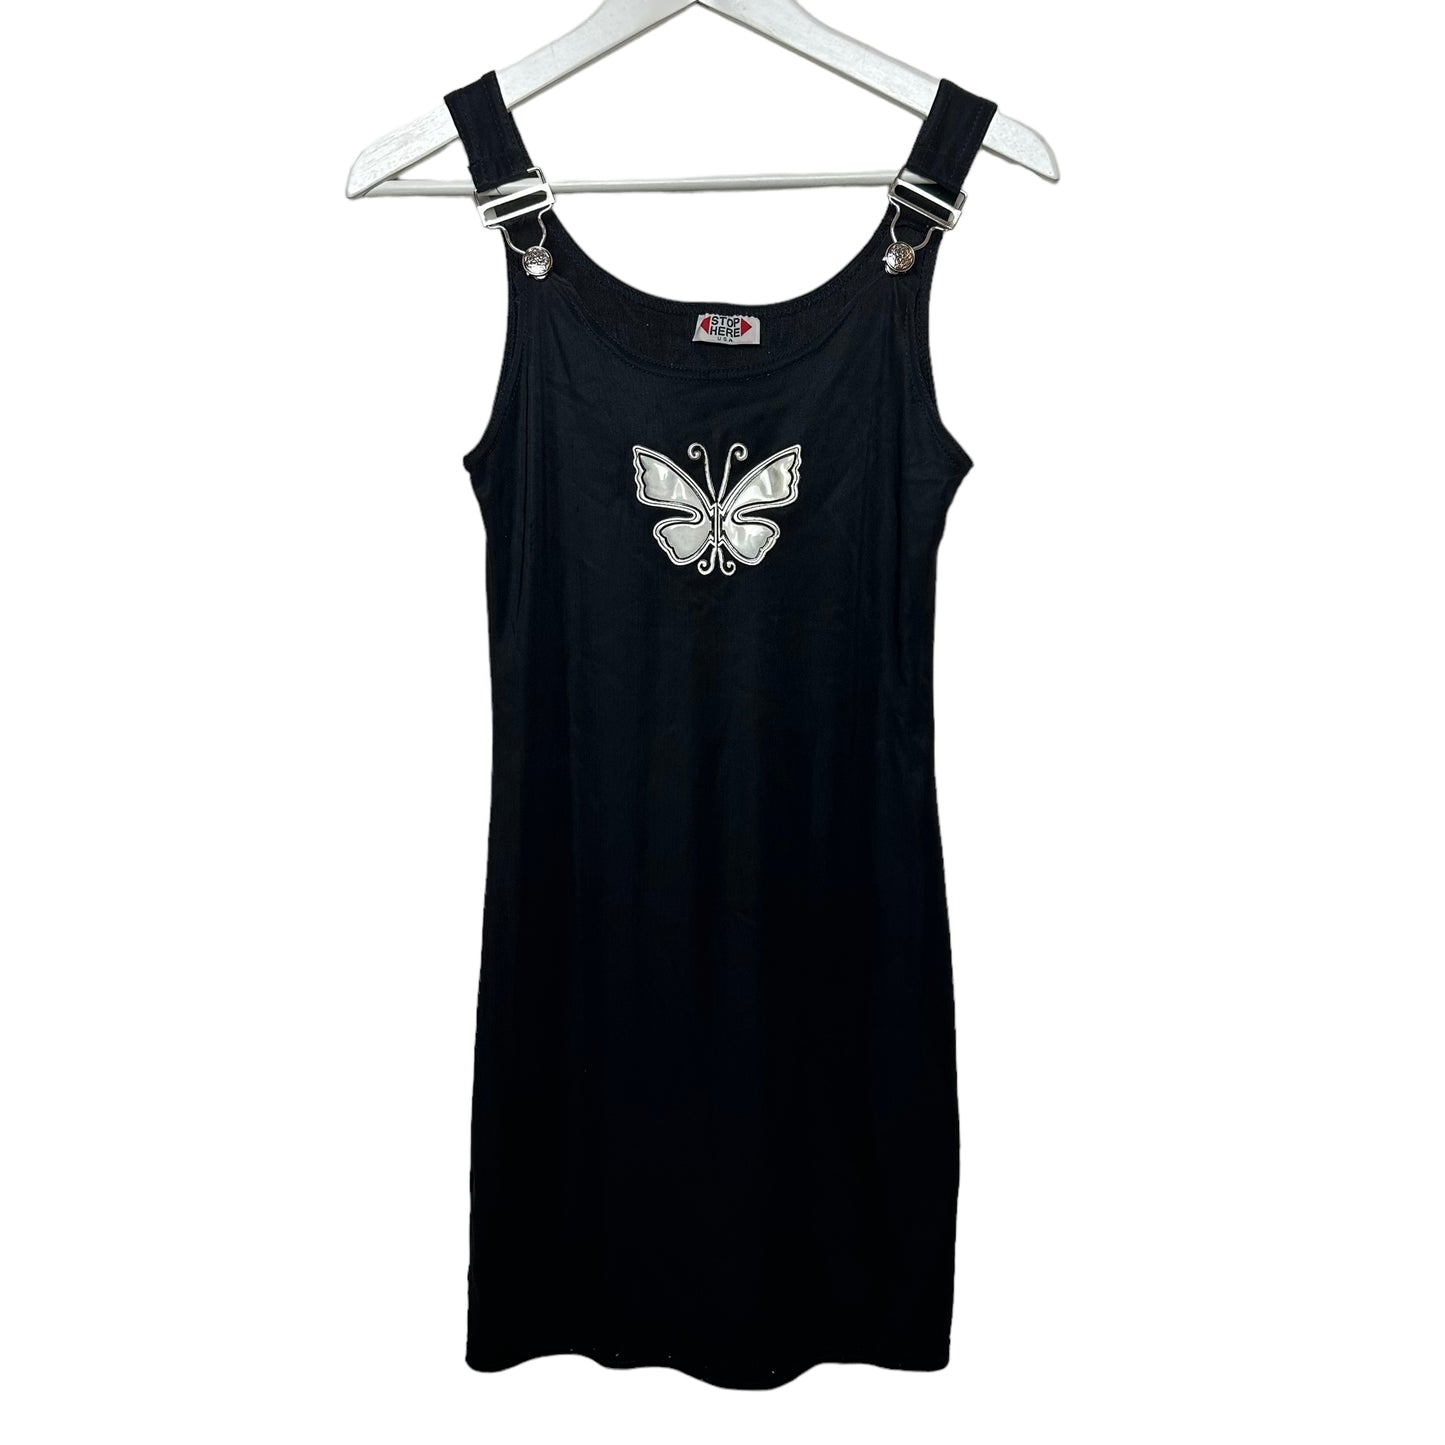 Vintage 90s Stop Here Butterfly Dress Overalls Black